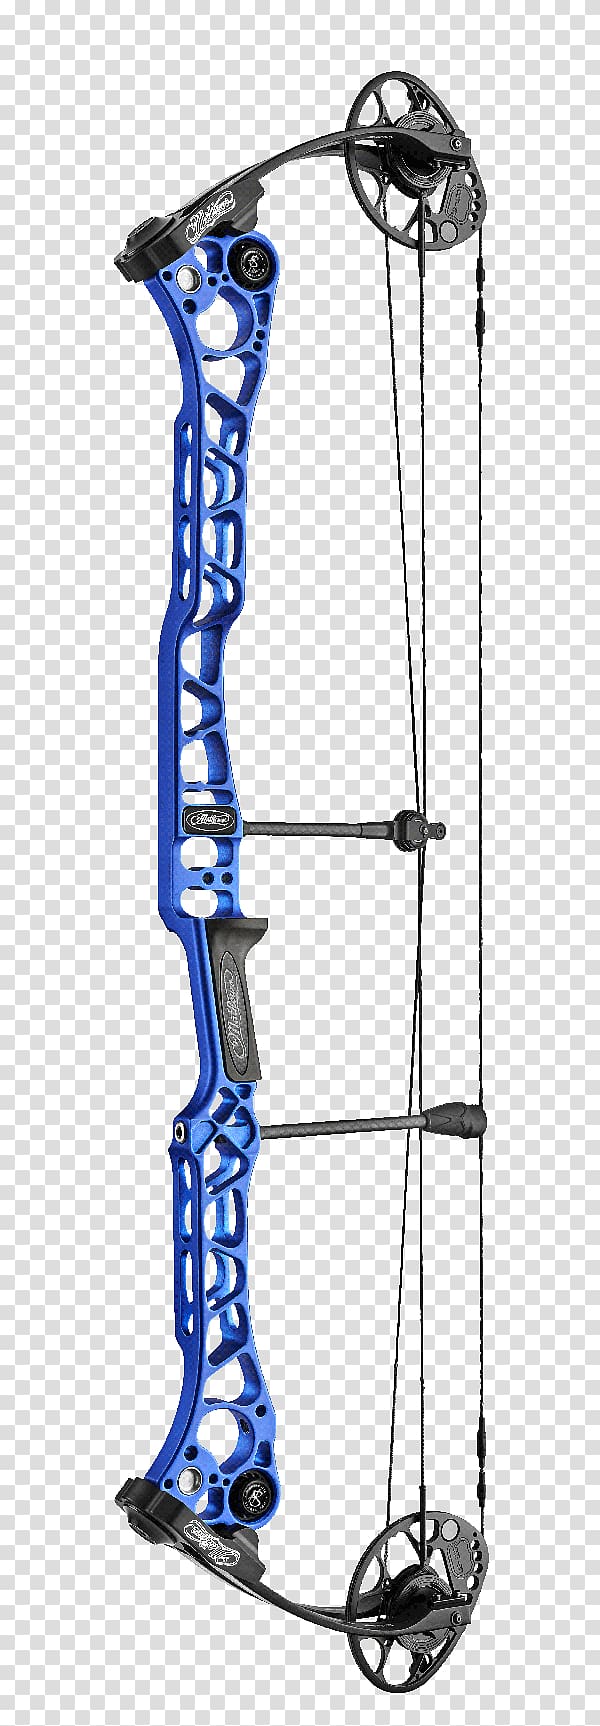 Compound Bows Bow and arrow World Archery Federation, NEET Archery Equipment transparent background PNG clipart